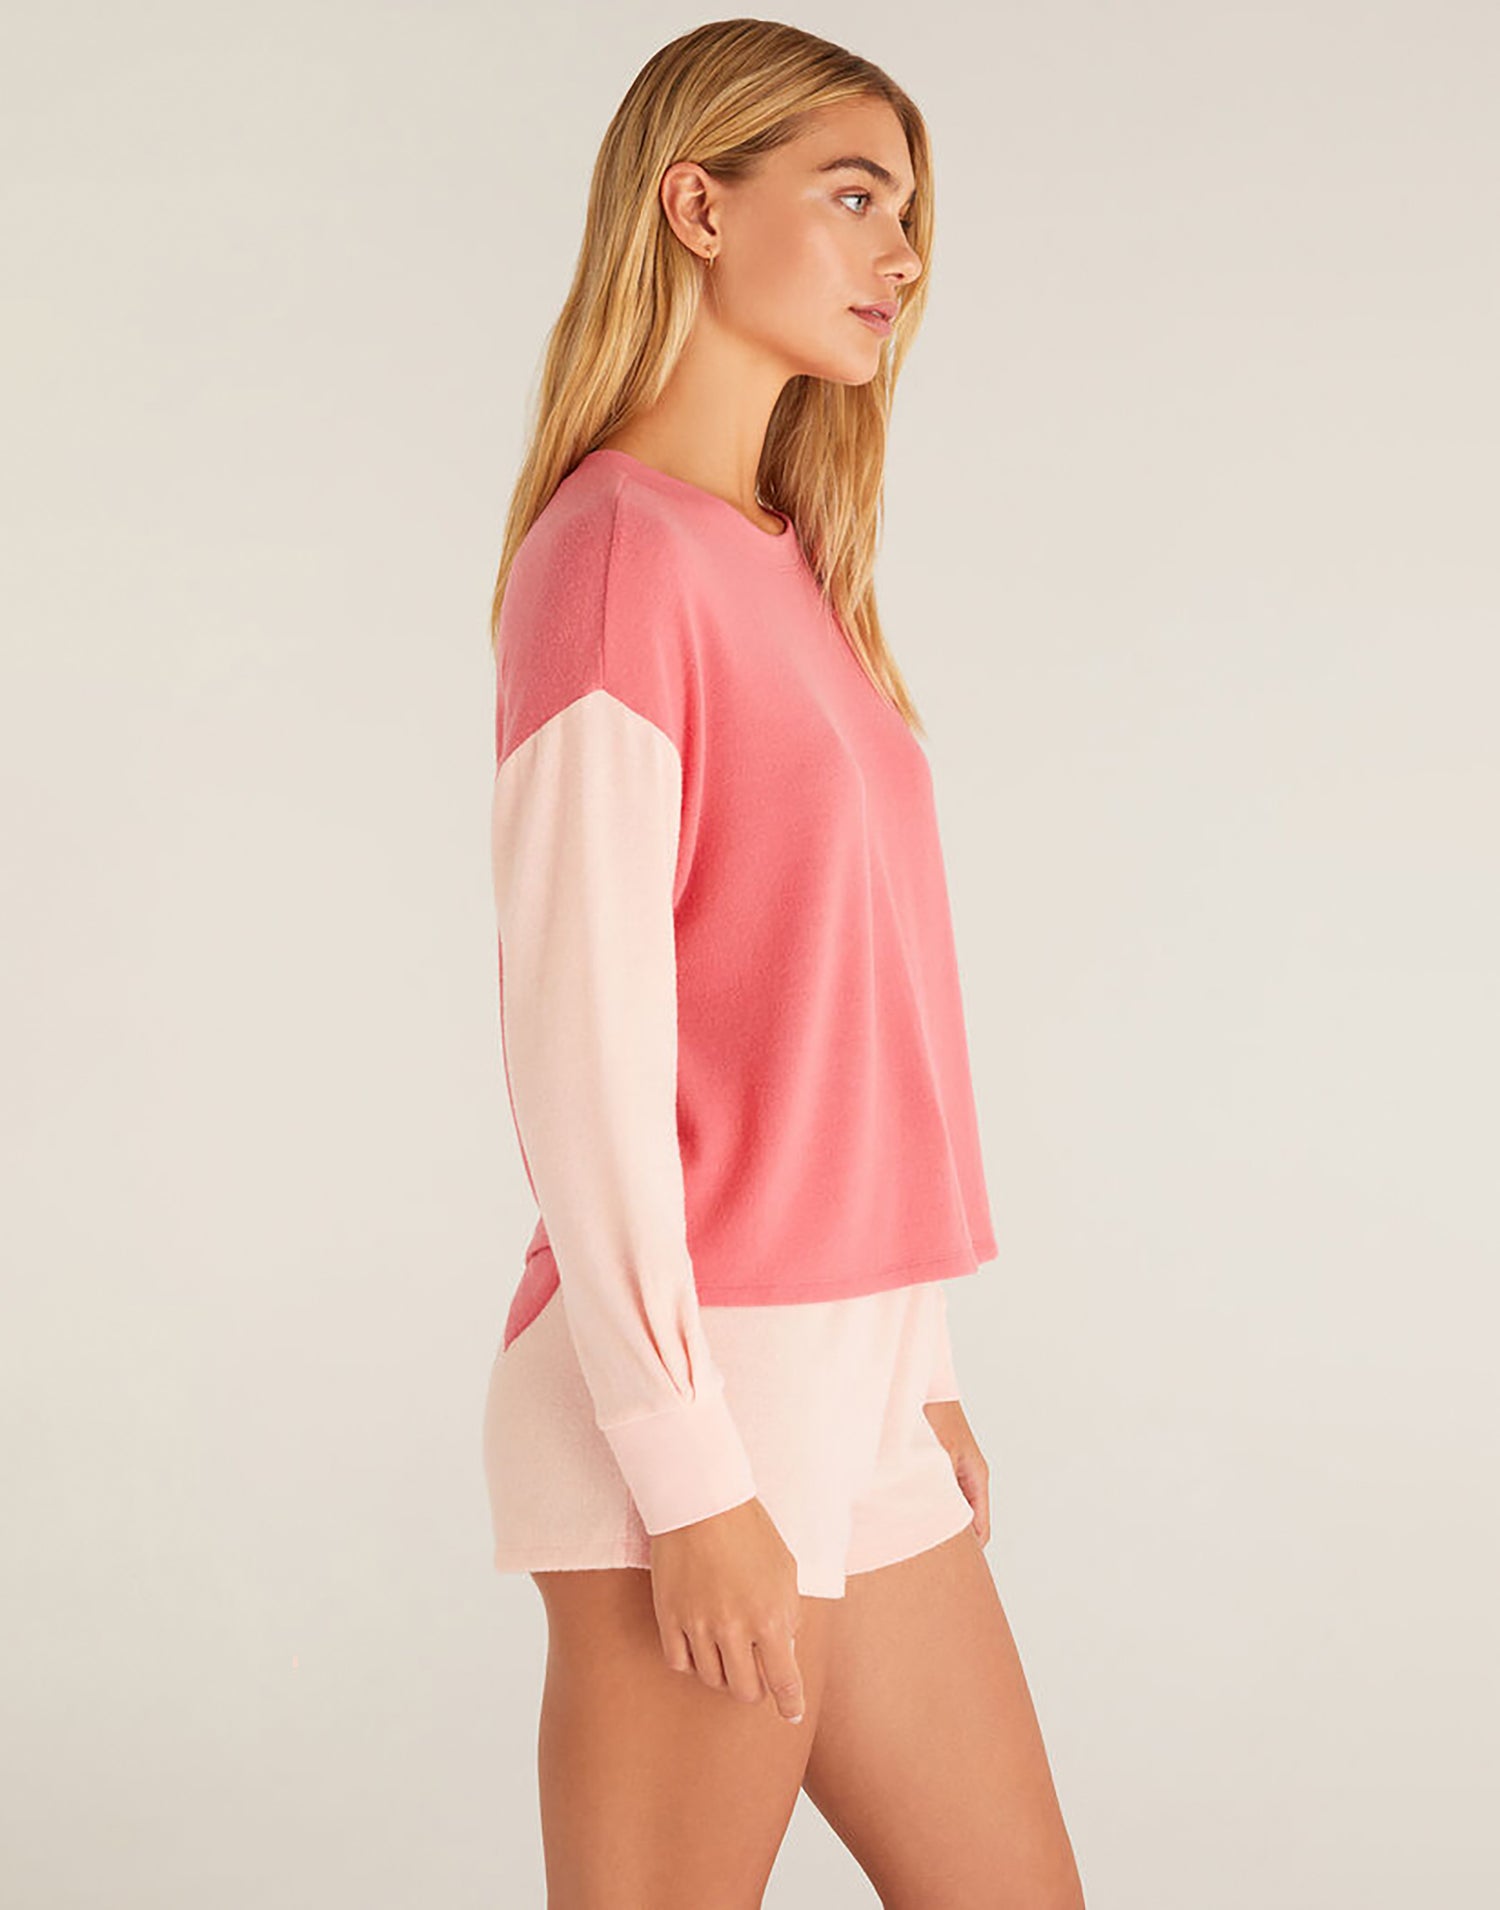 Color Block Long Sleeve Top by Z Supply in Pink Cherry - Side View